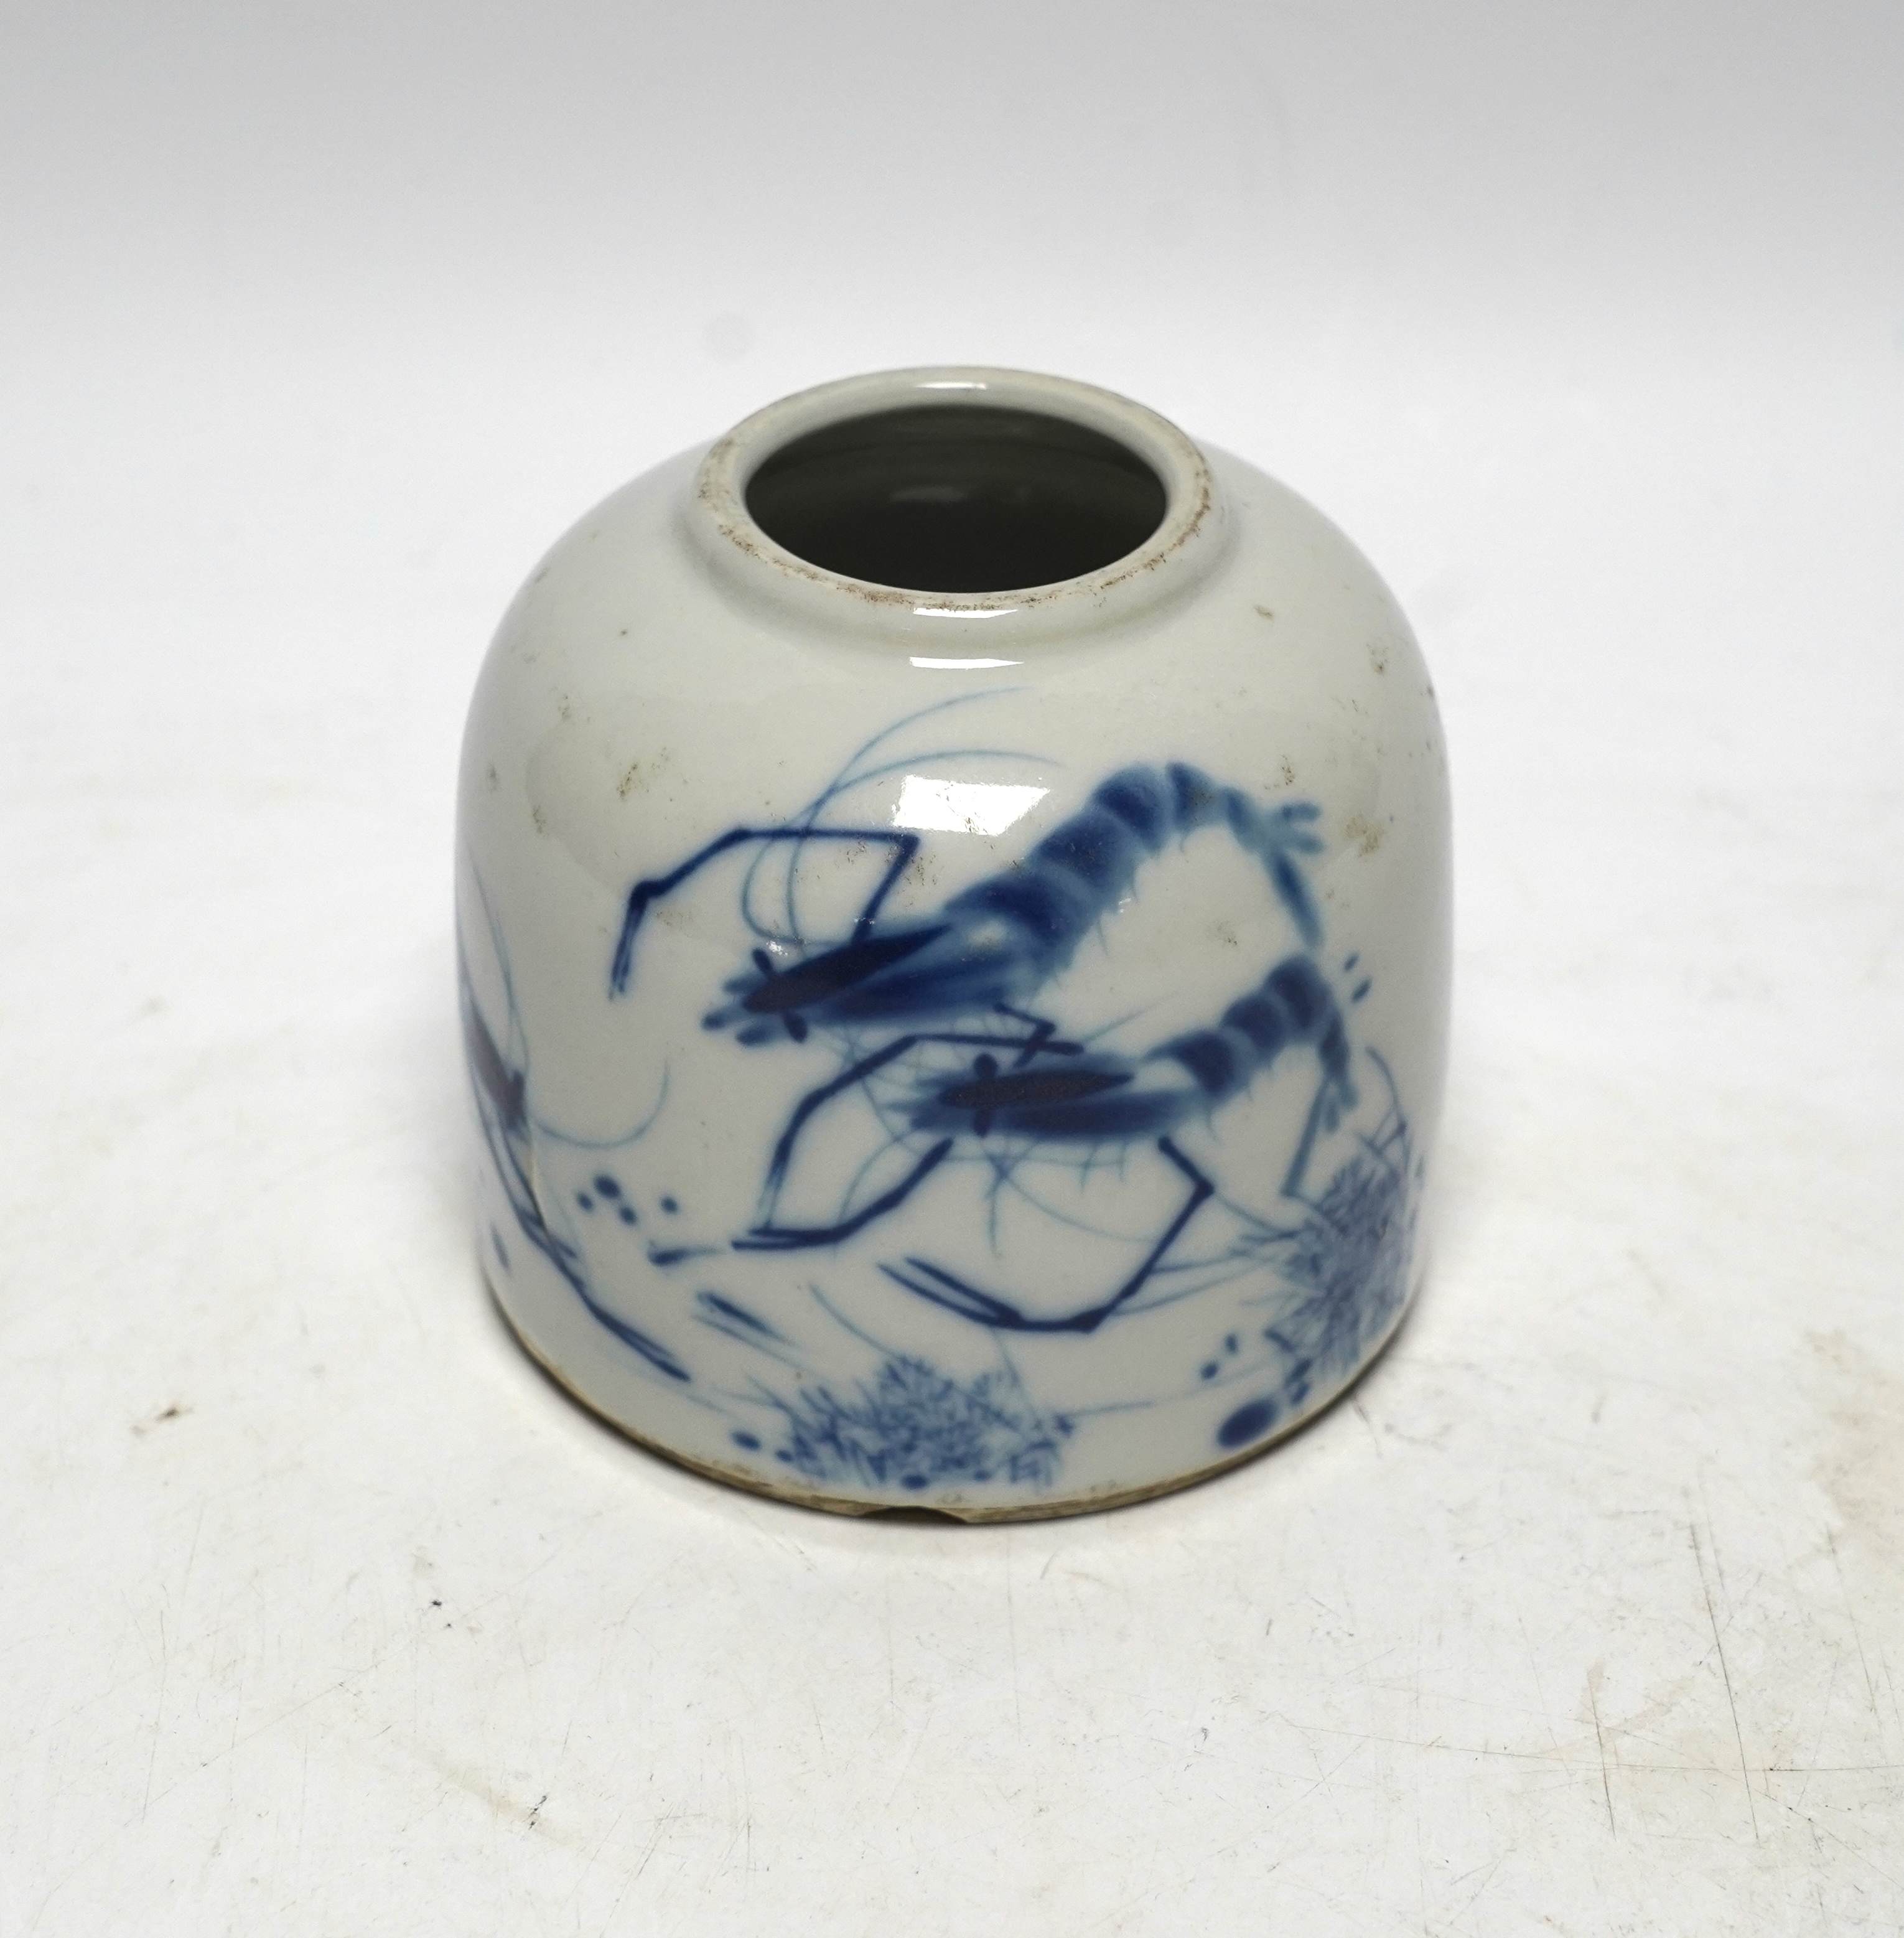 A Chinese blue and white brush pot, possibly Republic period, decorated with crayfish, 8.5cm